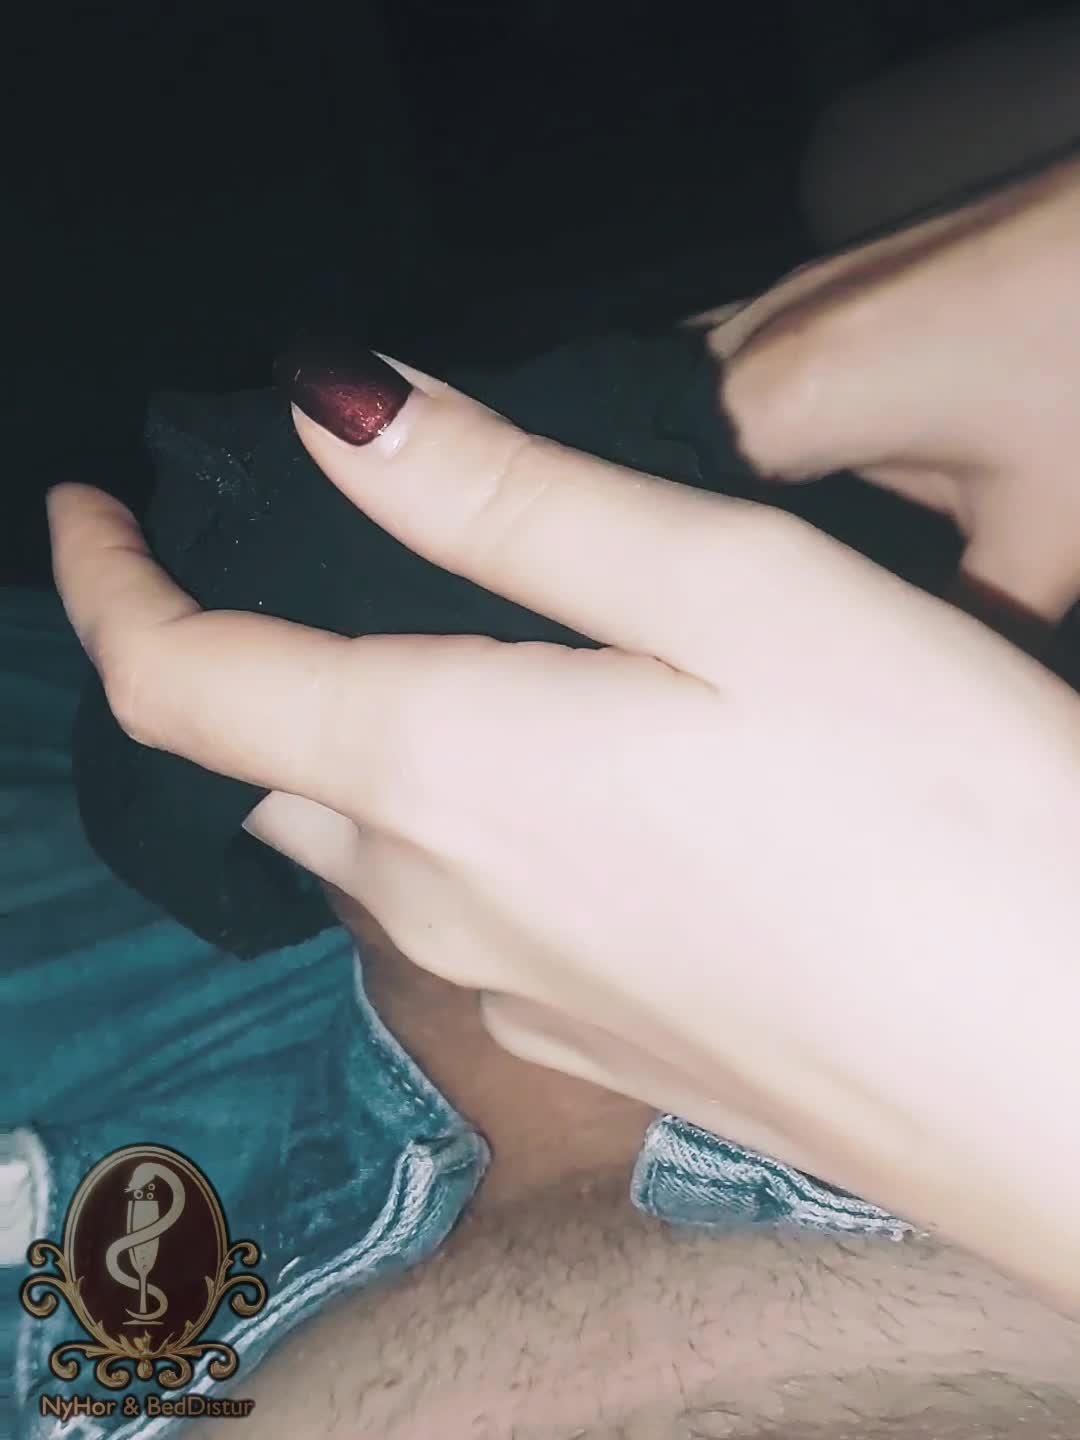 Video by nyHor&bedDistur with the username @nyHorBedDistur, who is a verified user,  August 28, 2022 at 12:51 PM. The post is about the topic Handjob and the text says 'Share for more!

Freshly worn and soaked for a whole day. Cum, pussy juice and urine. The smell was breathtaking and incredibly hot. There is no better way to get a handjob'